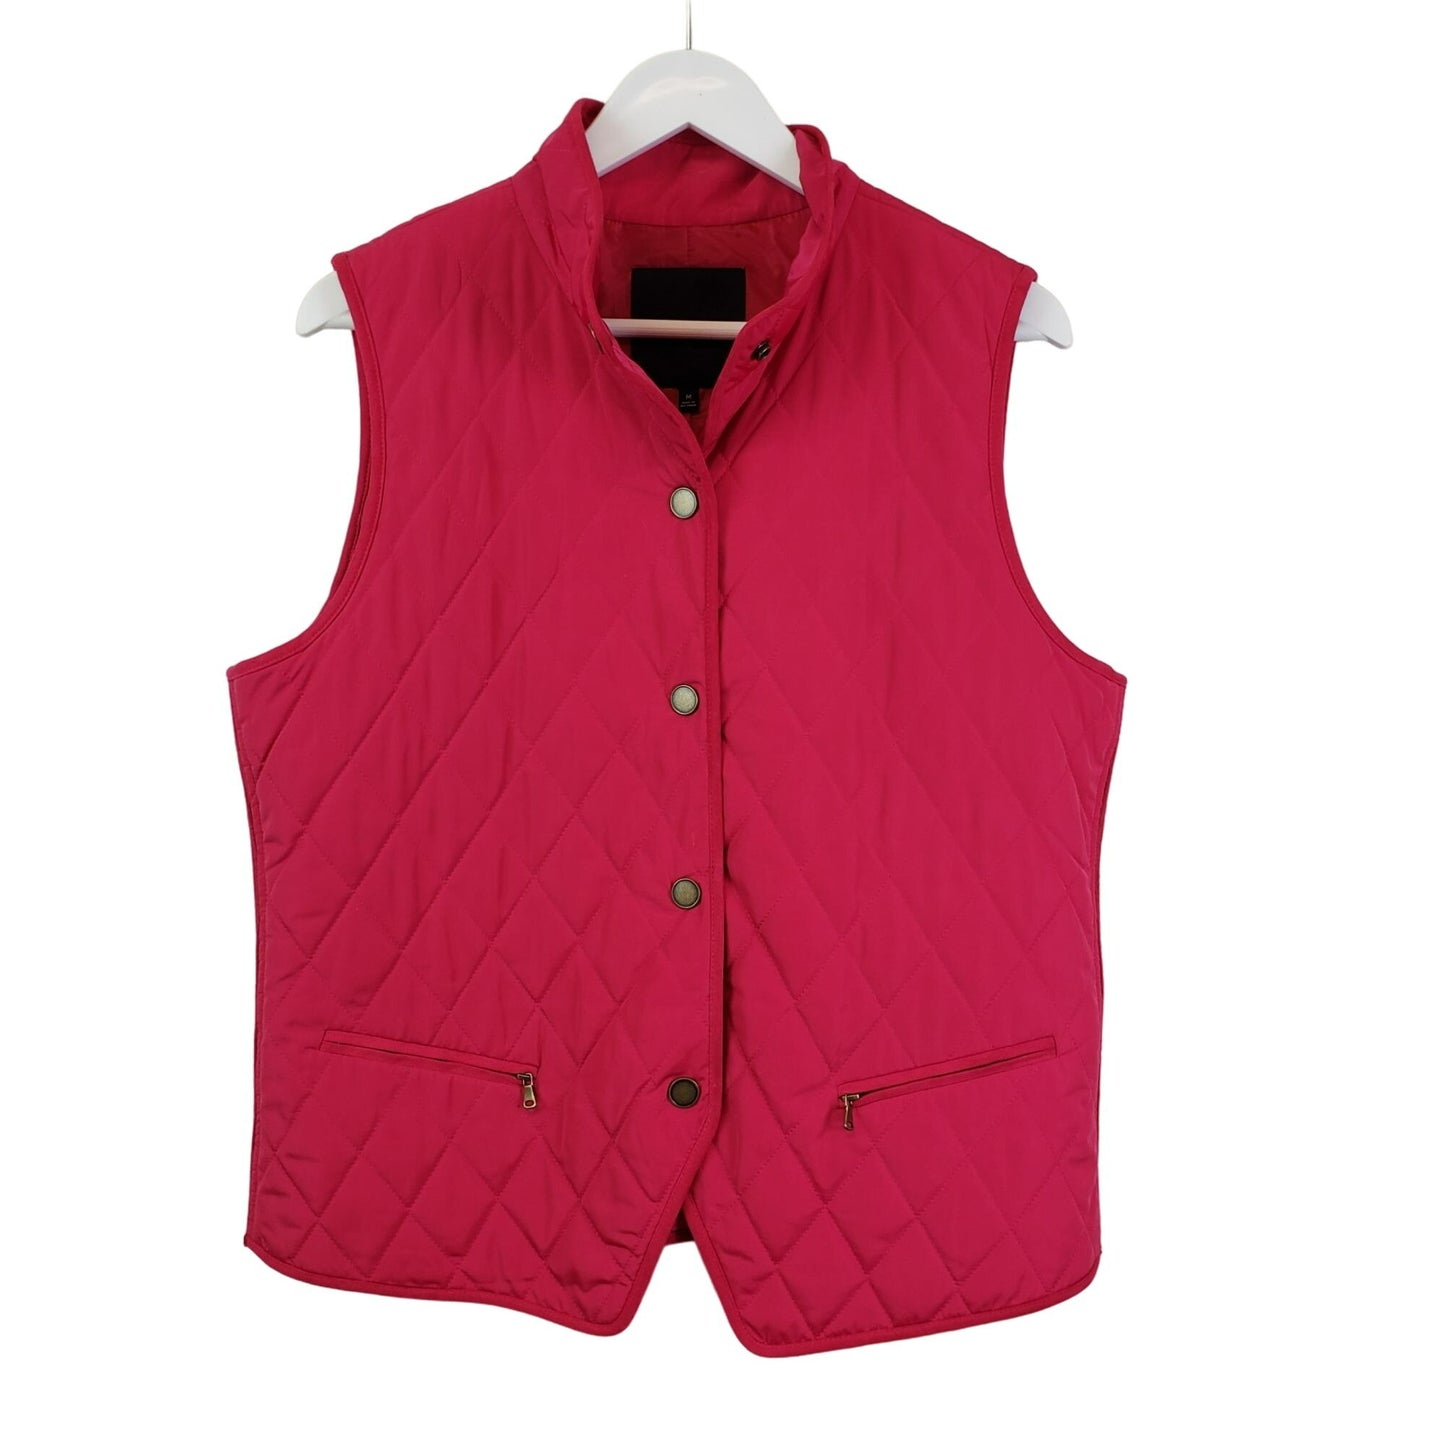 Talbots Mixed Media Wool Blend Quilted Vest Size Medium